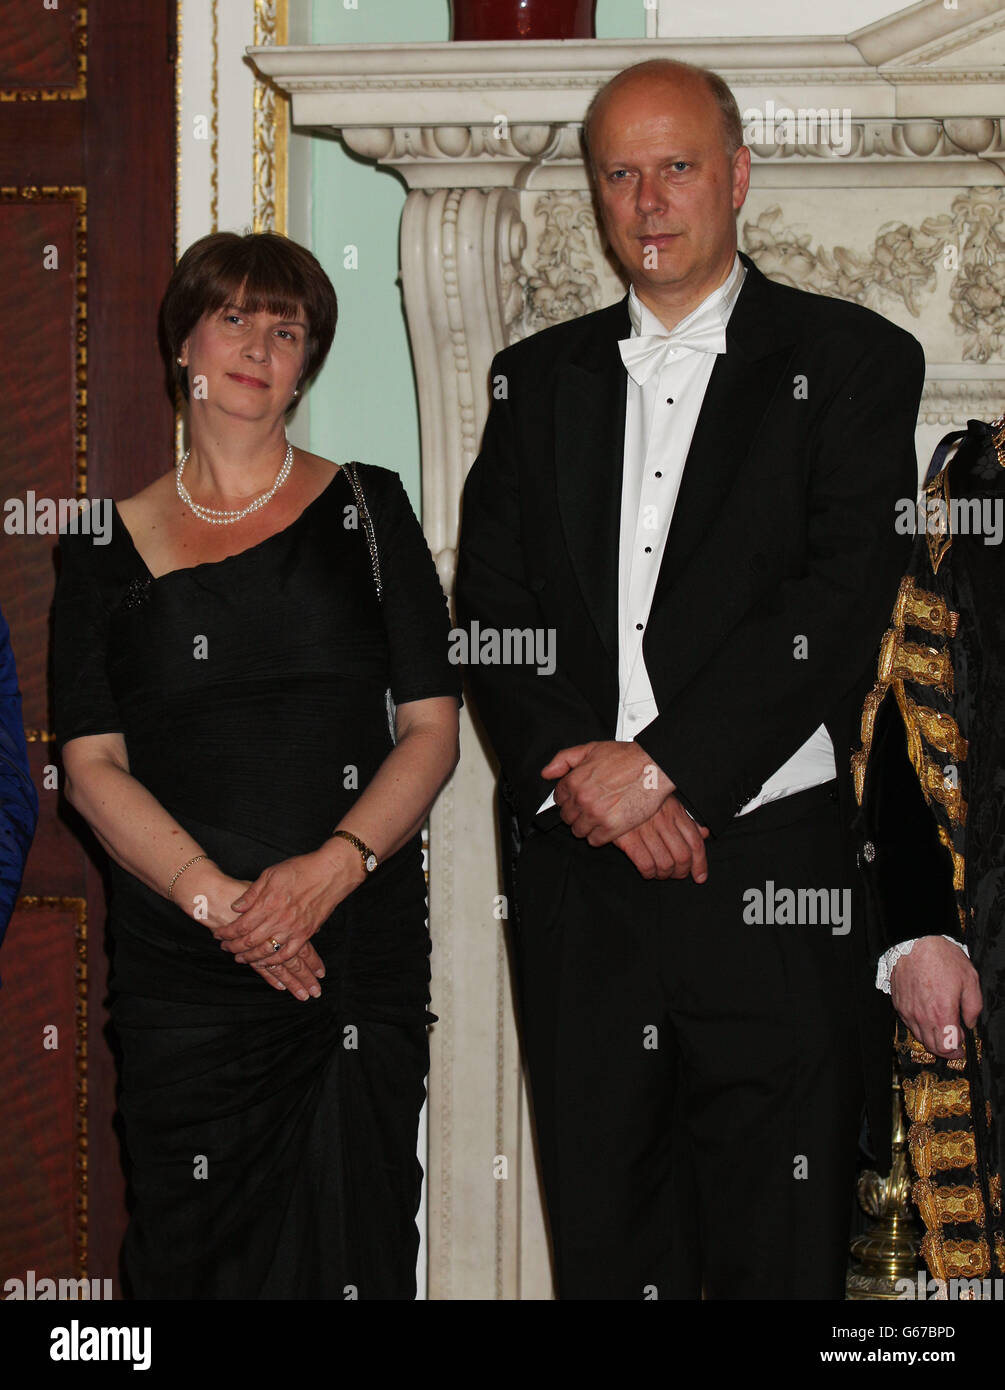 Justice Secretary Chris Grayling and his wife Susan attend the Lord Mayor of the City of London dinner to Her Majesty's judges, at The Mansion House in London. Stock Photo